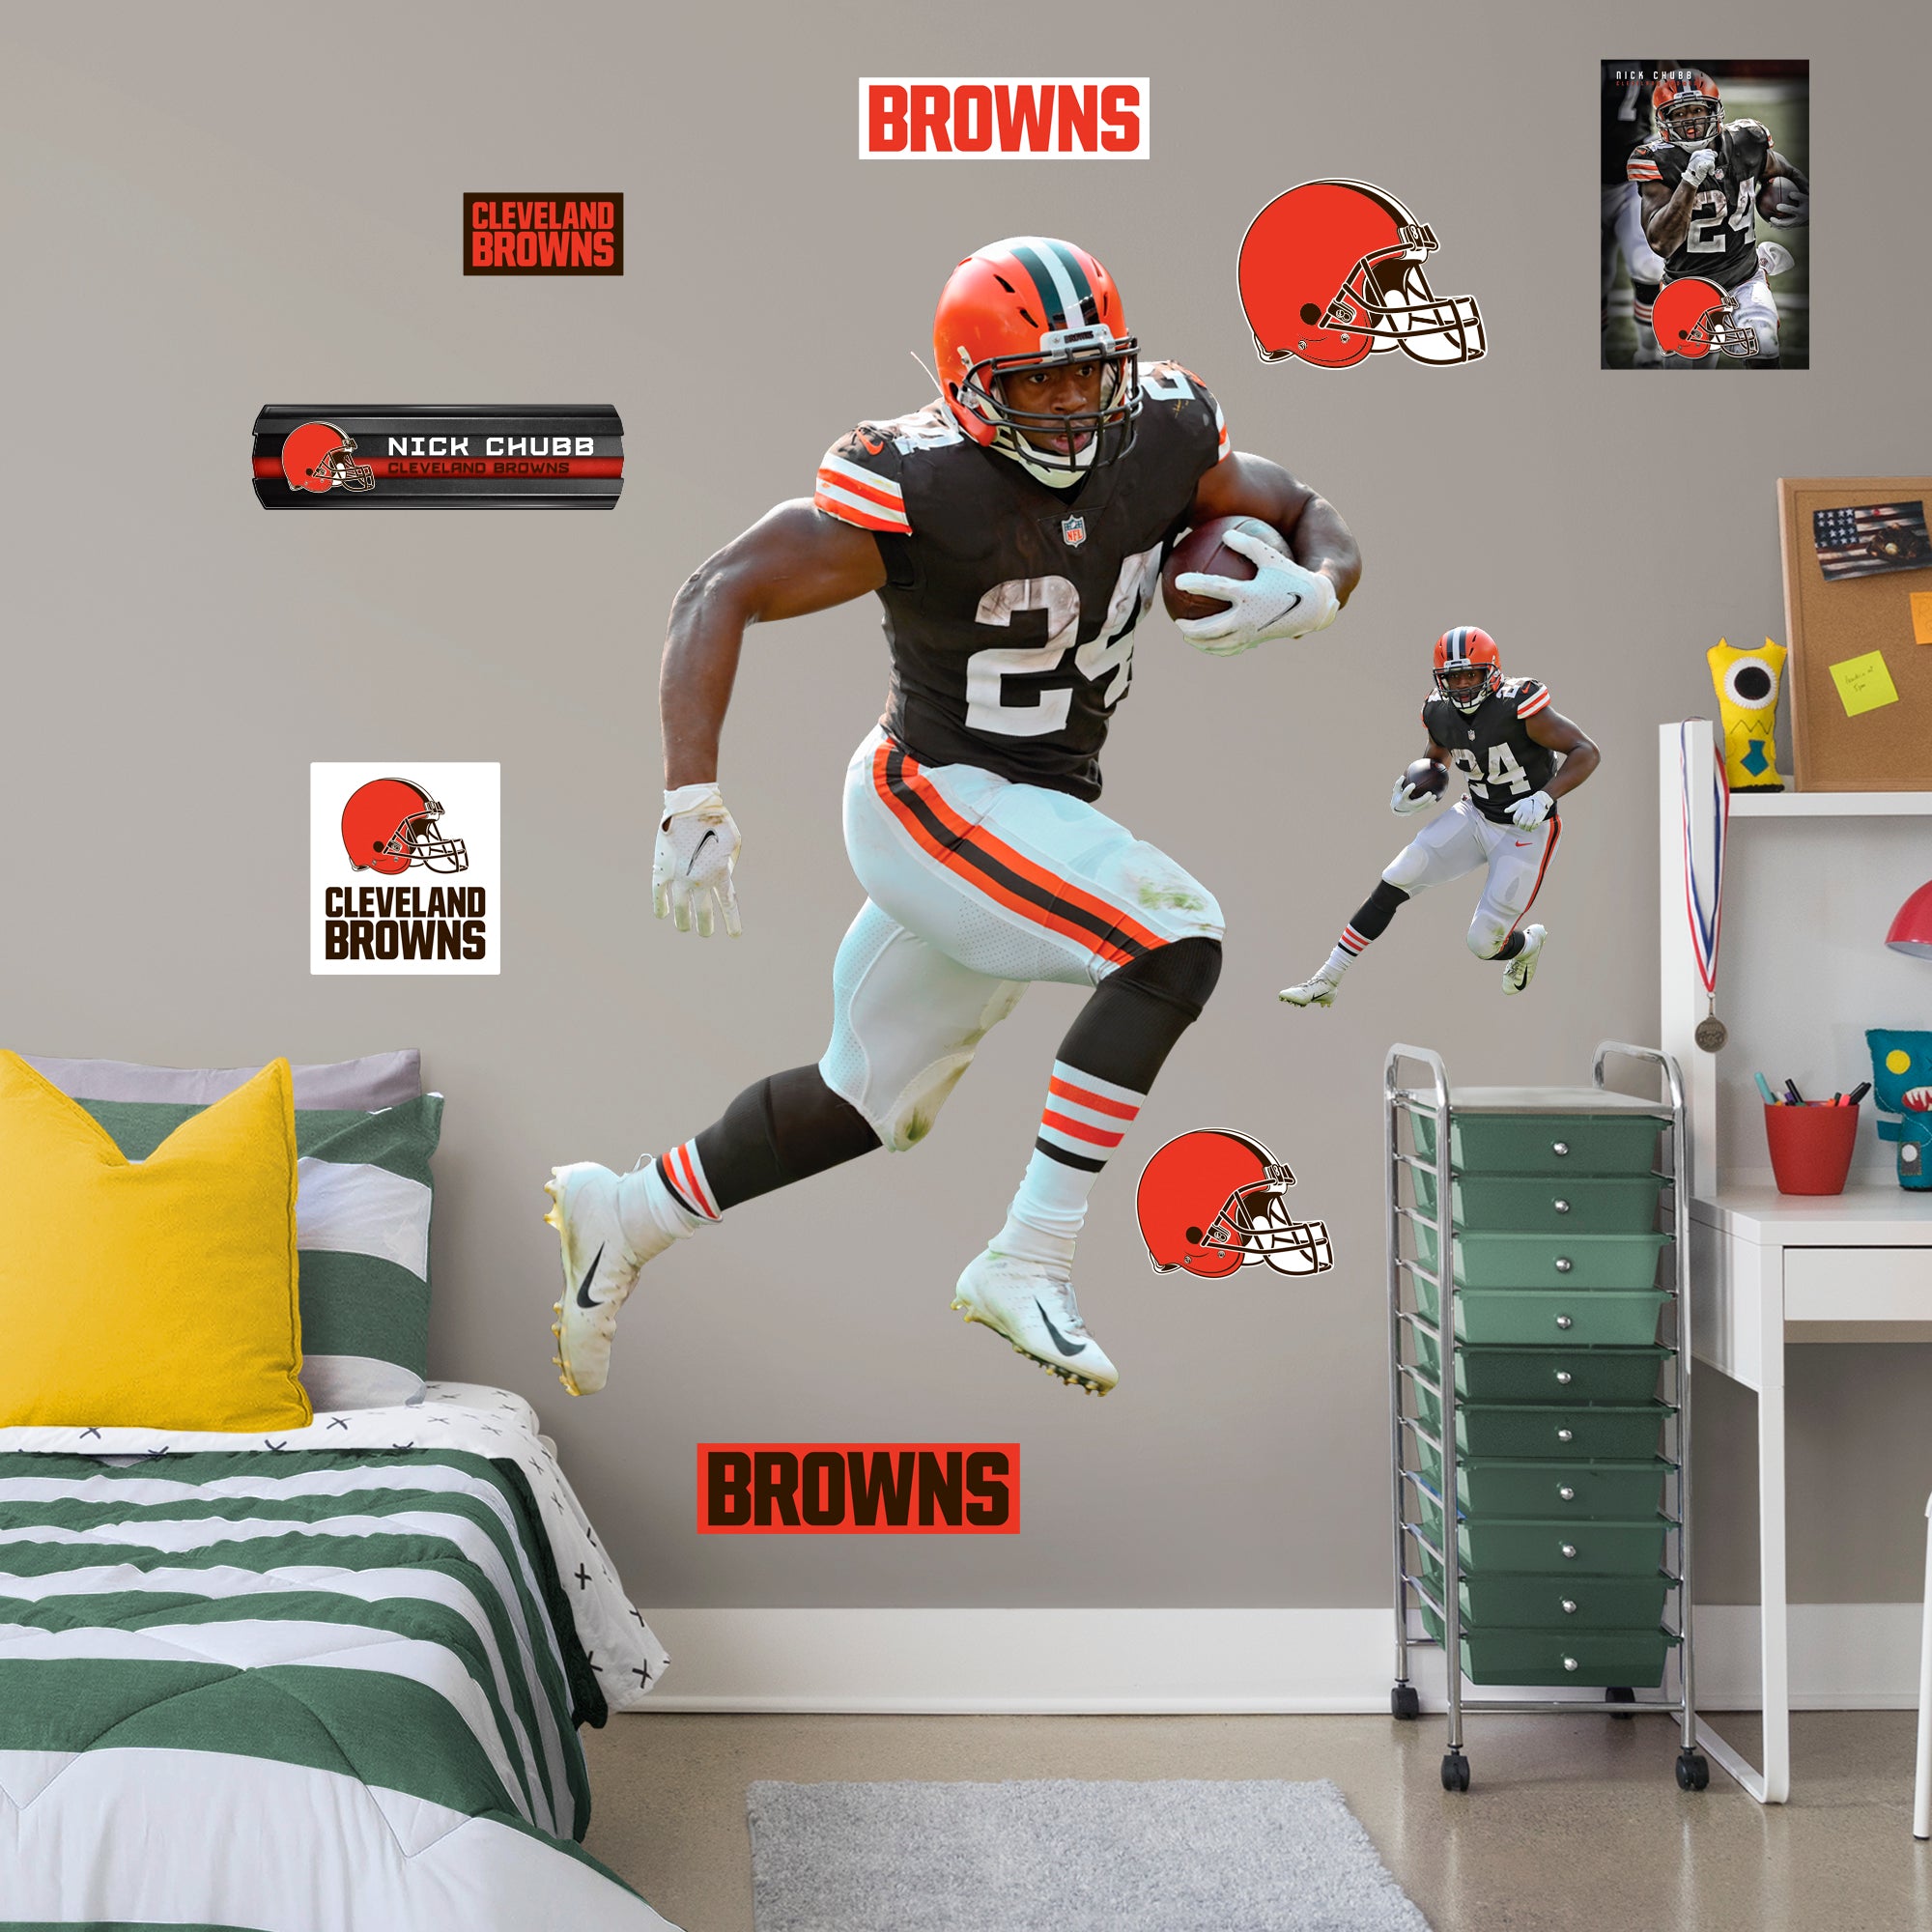 Nick Chubb 2020 - Officially Licensed NFL Removable Wall Decal XL by Fathead | Vinyl